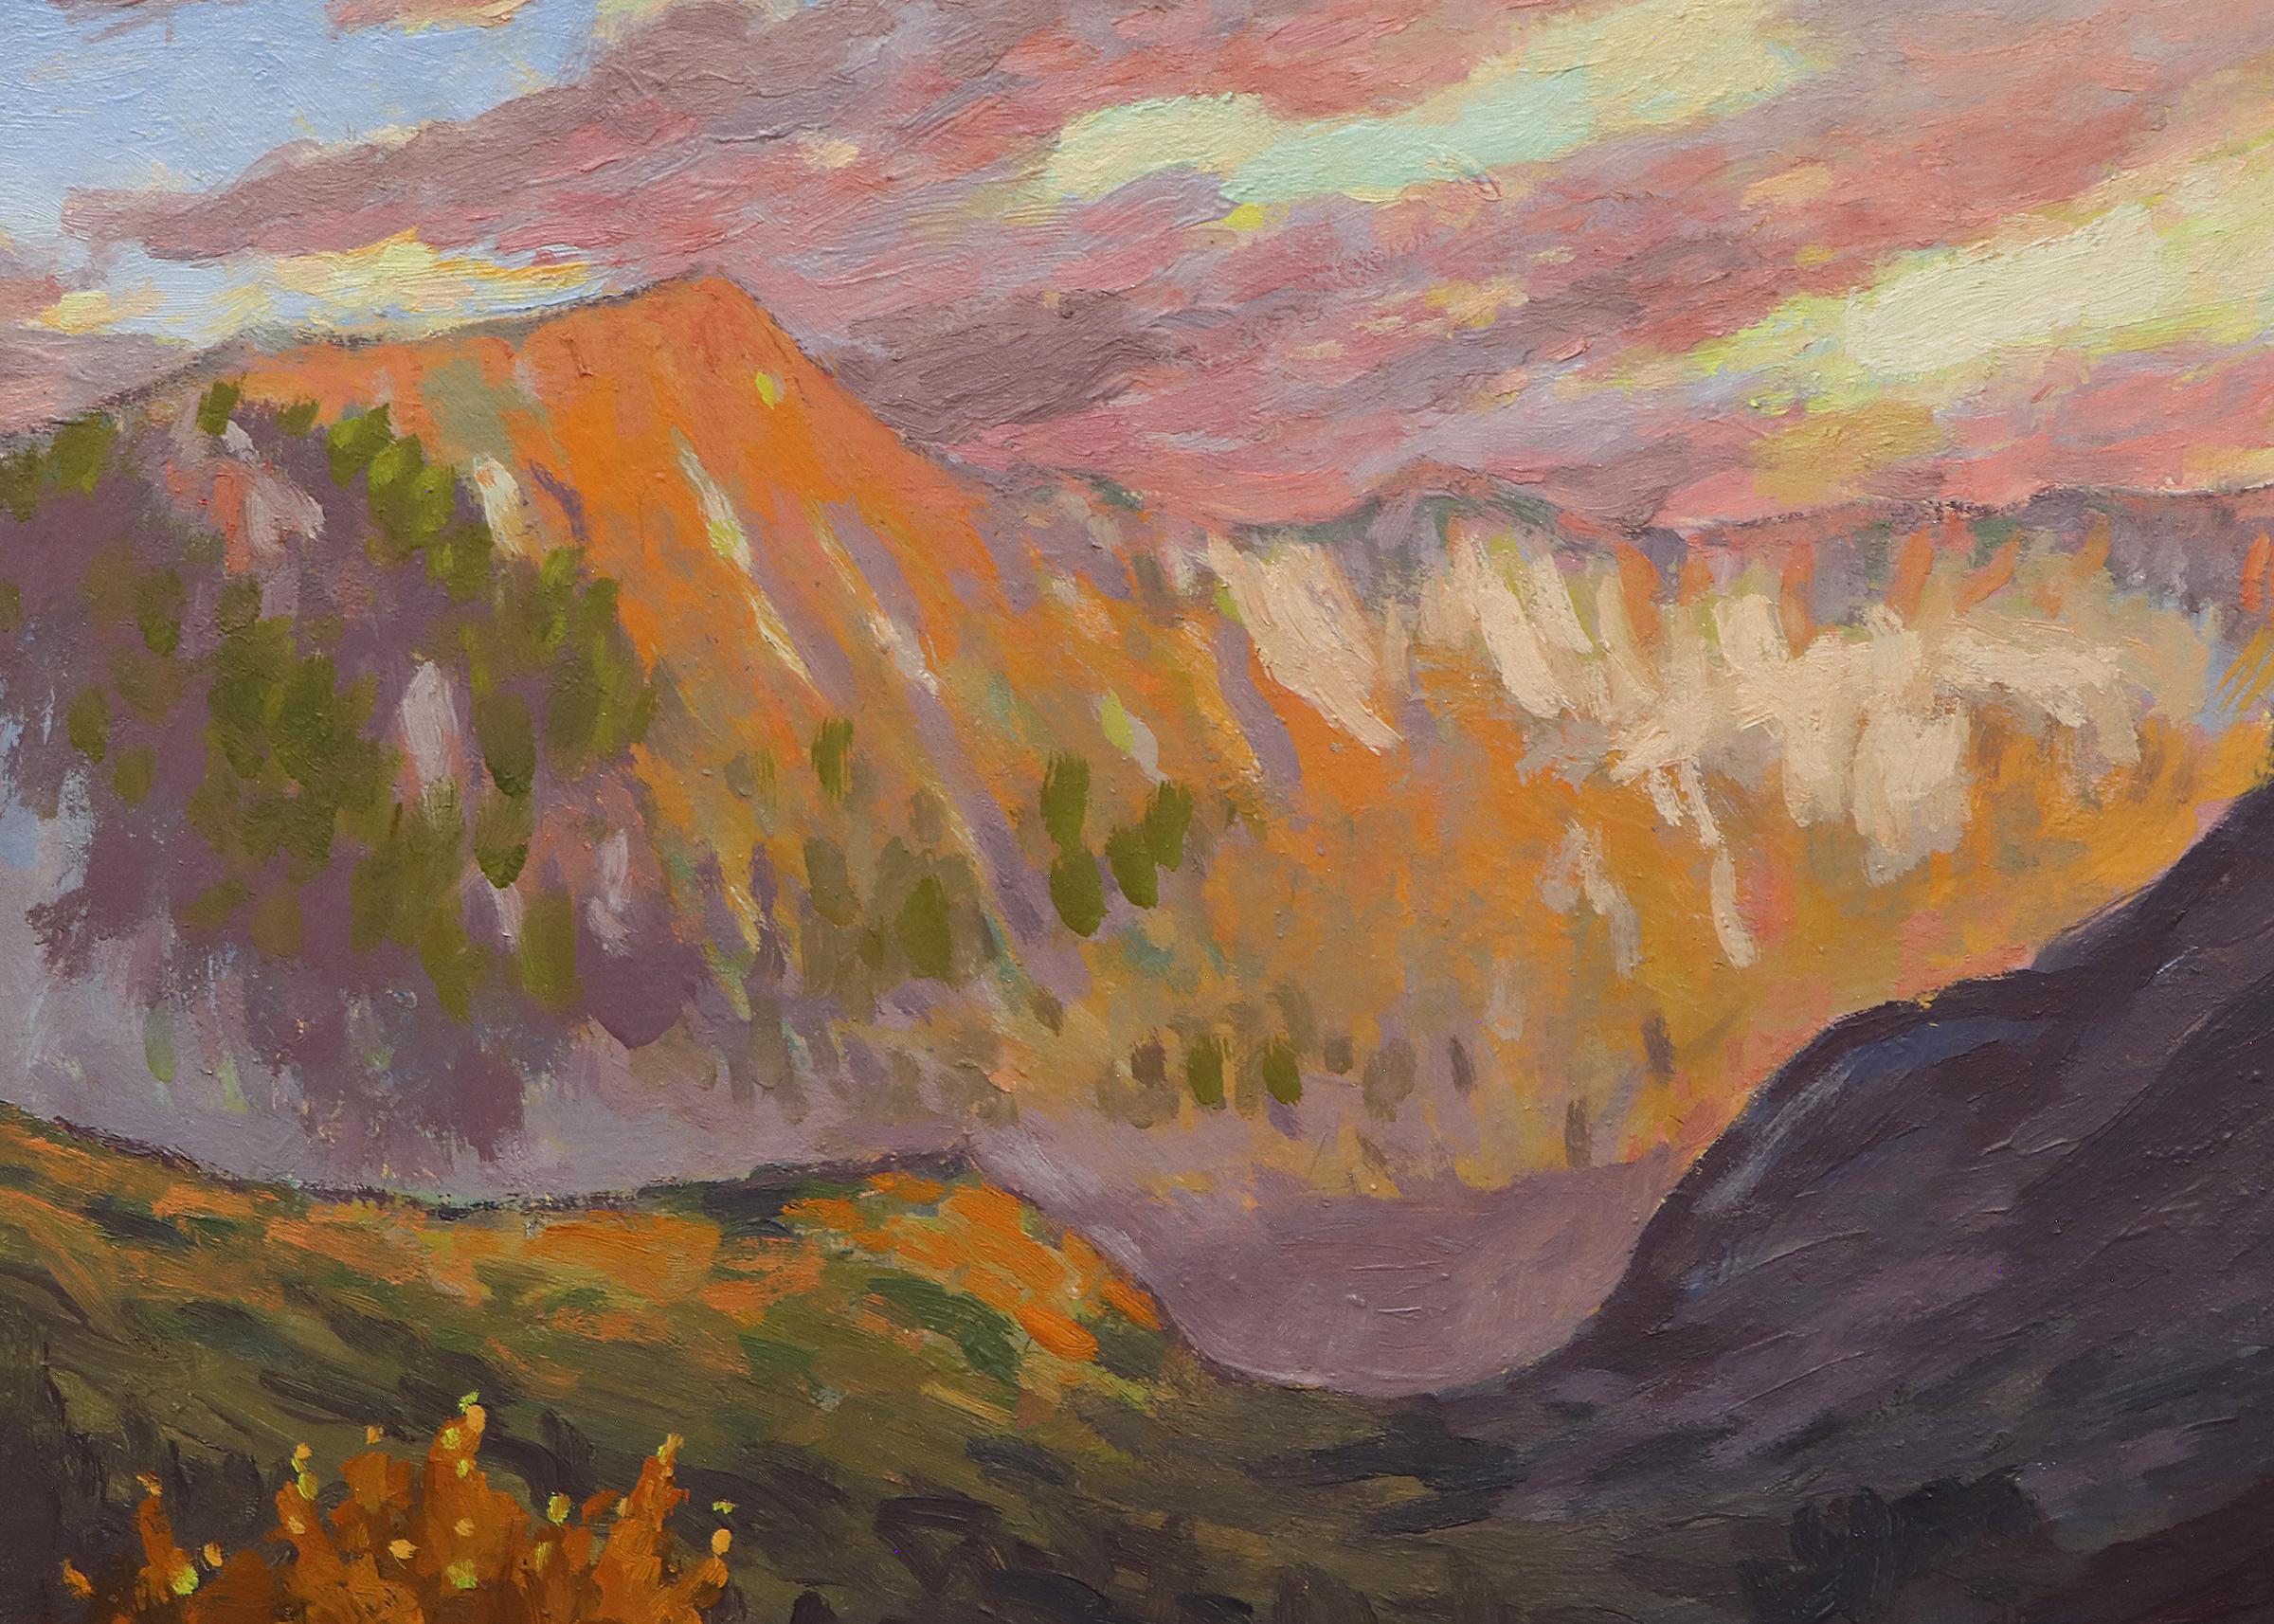 Oil on board painted in 1958 by Harold Vincent Skene (1883-1978) titled 'Mountain Sunset'. Colorado mountain autumn landscape featuring changing leaves in front of a mountain backdrop with clouds.  Presented in a custom frame, outer dimensions